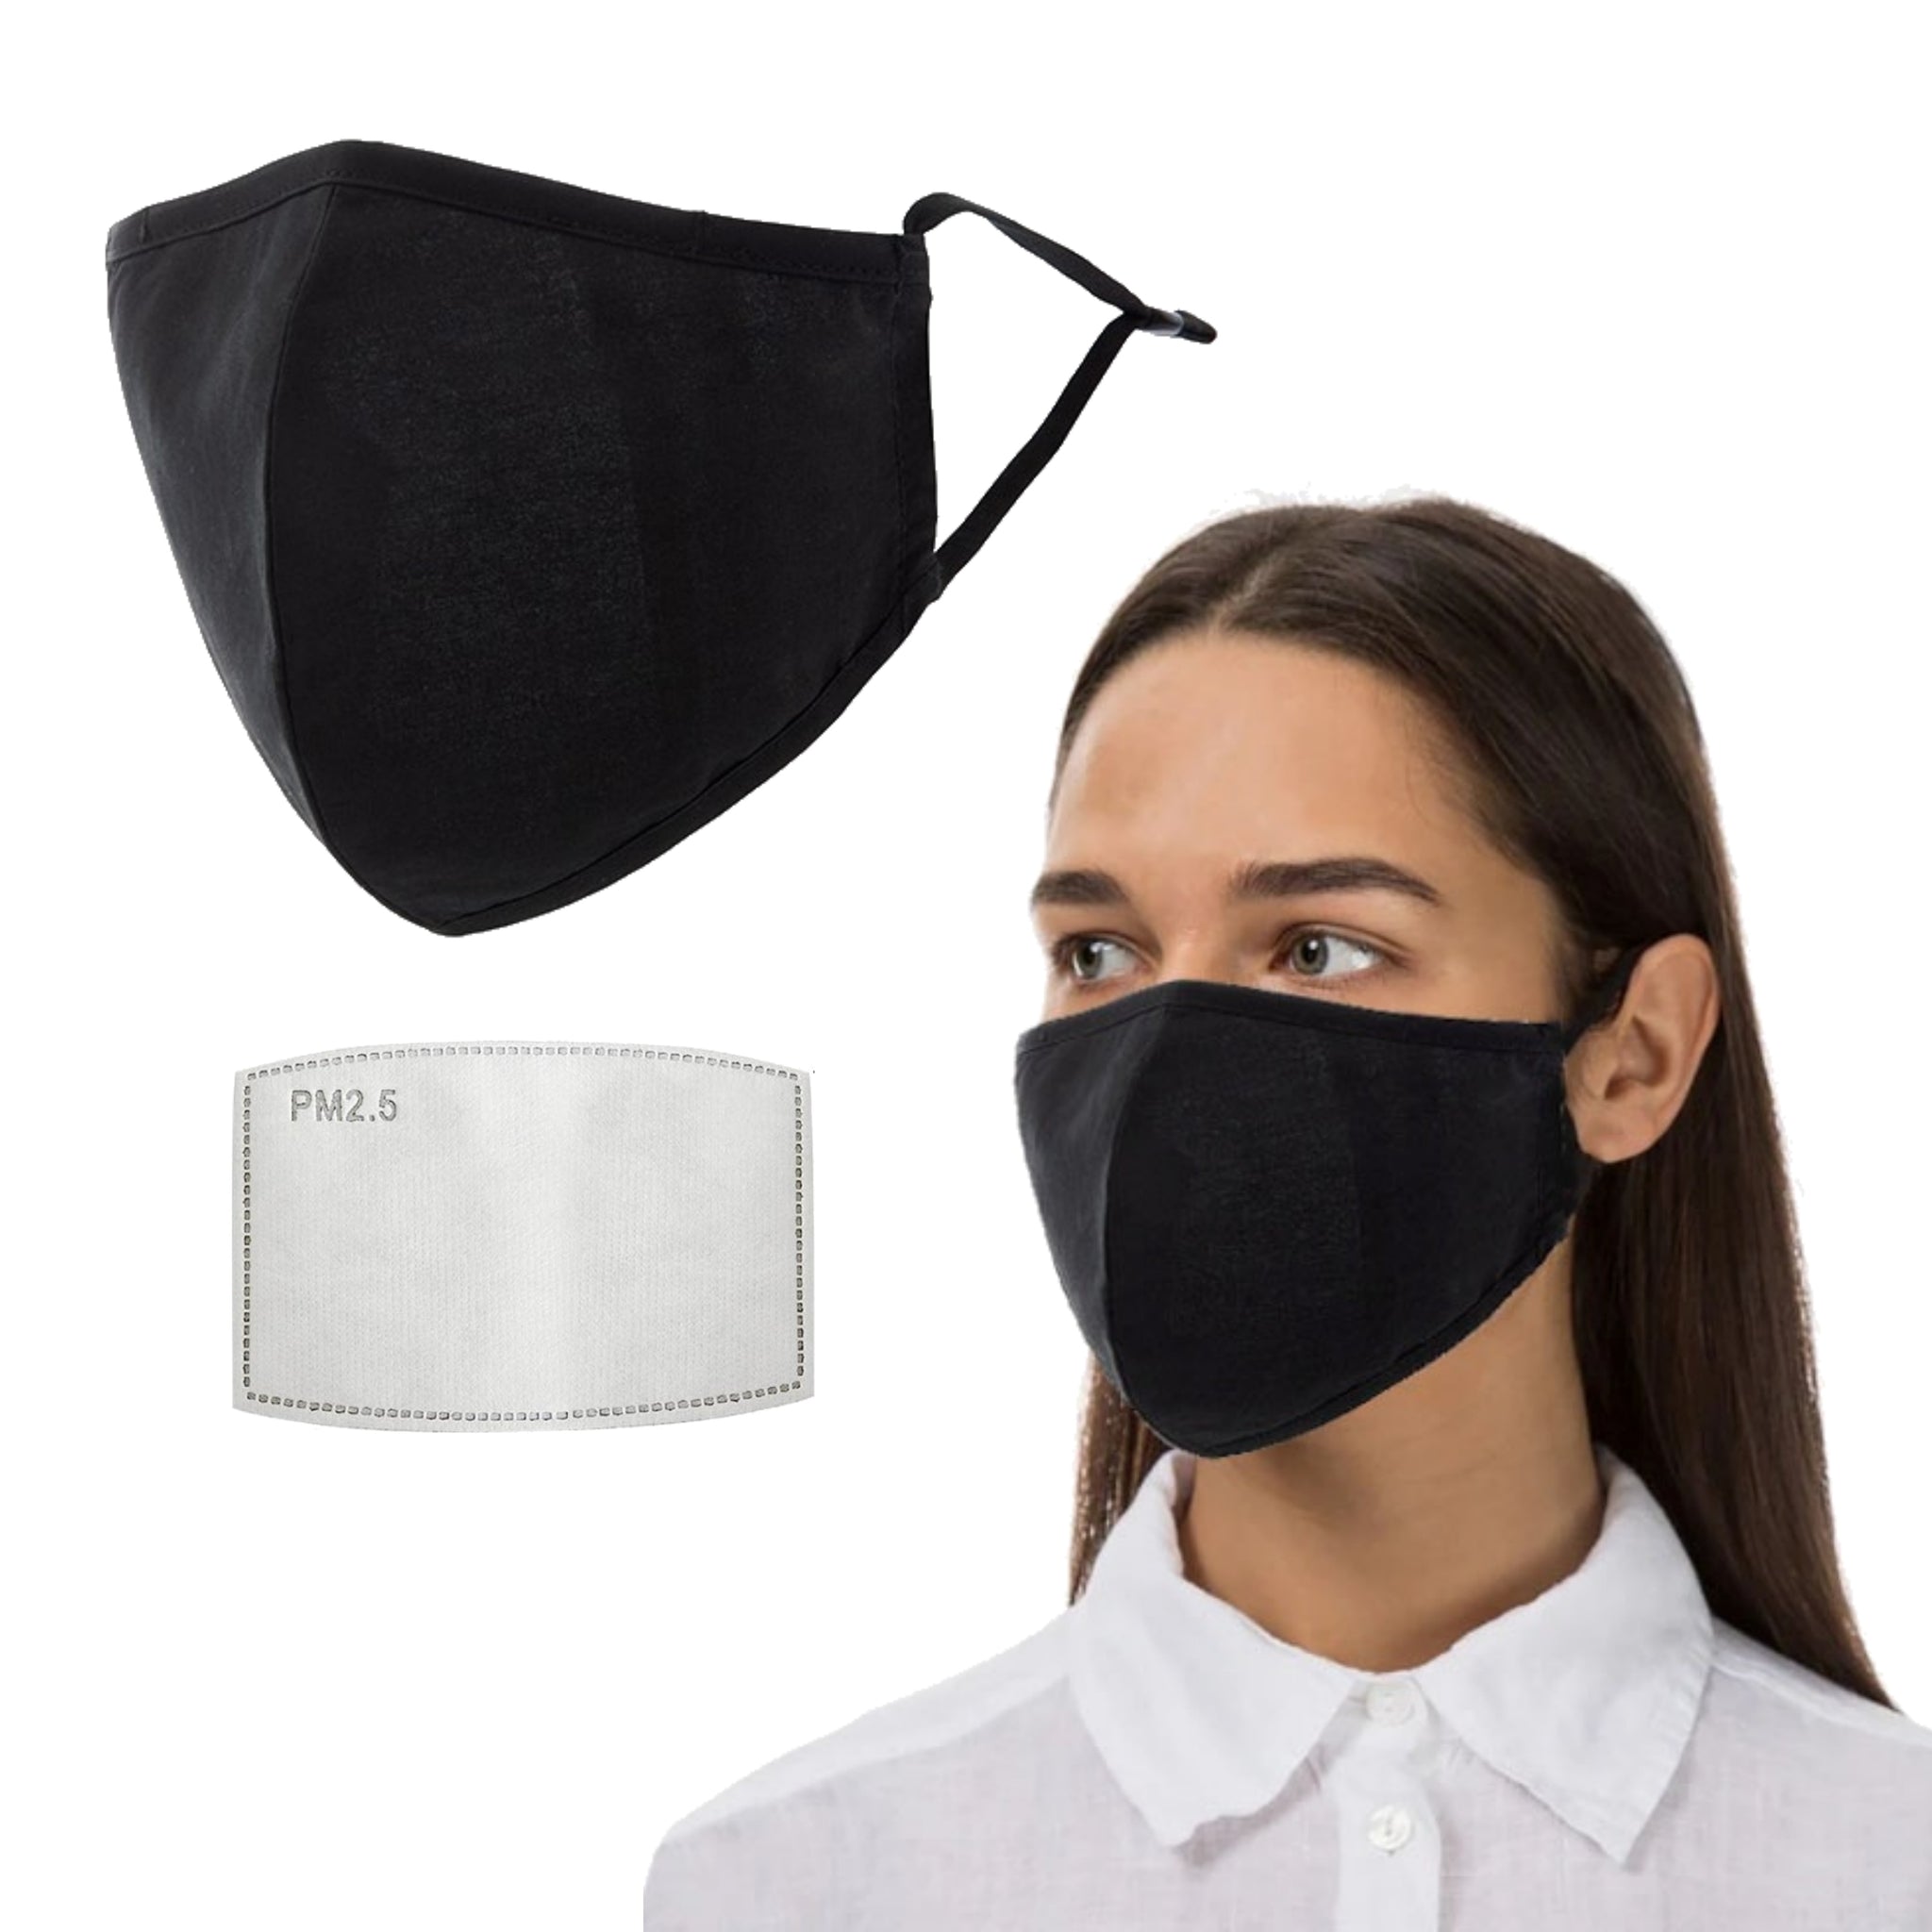 2-Layer Cotton Black Face Mask (+ 1 Free Filter) Washable Reusable